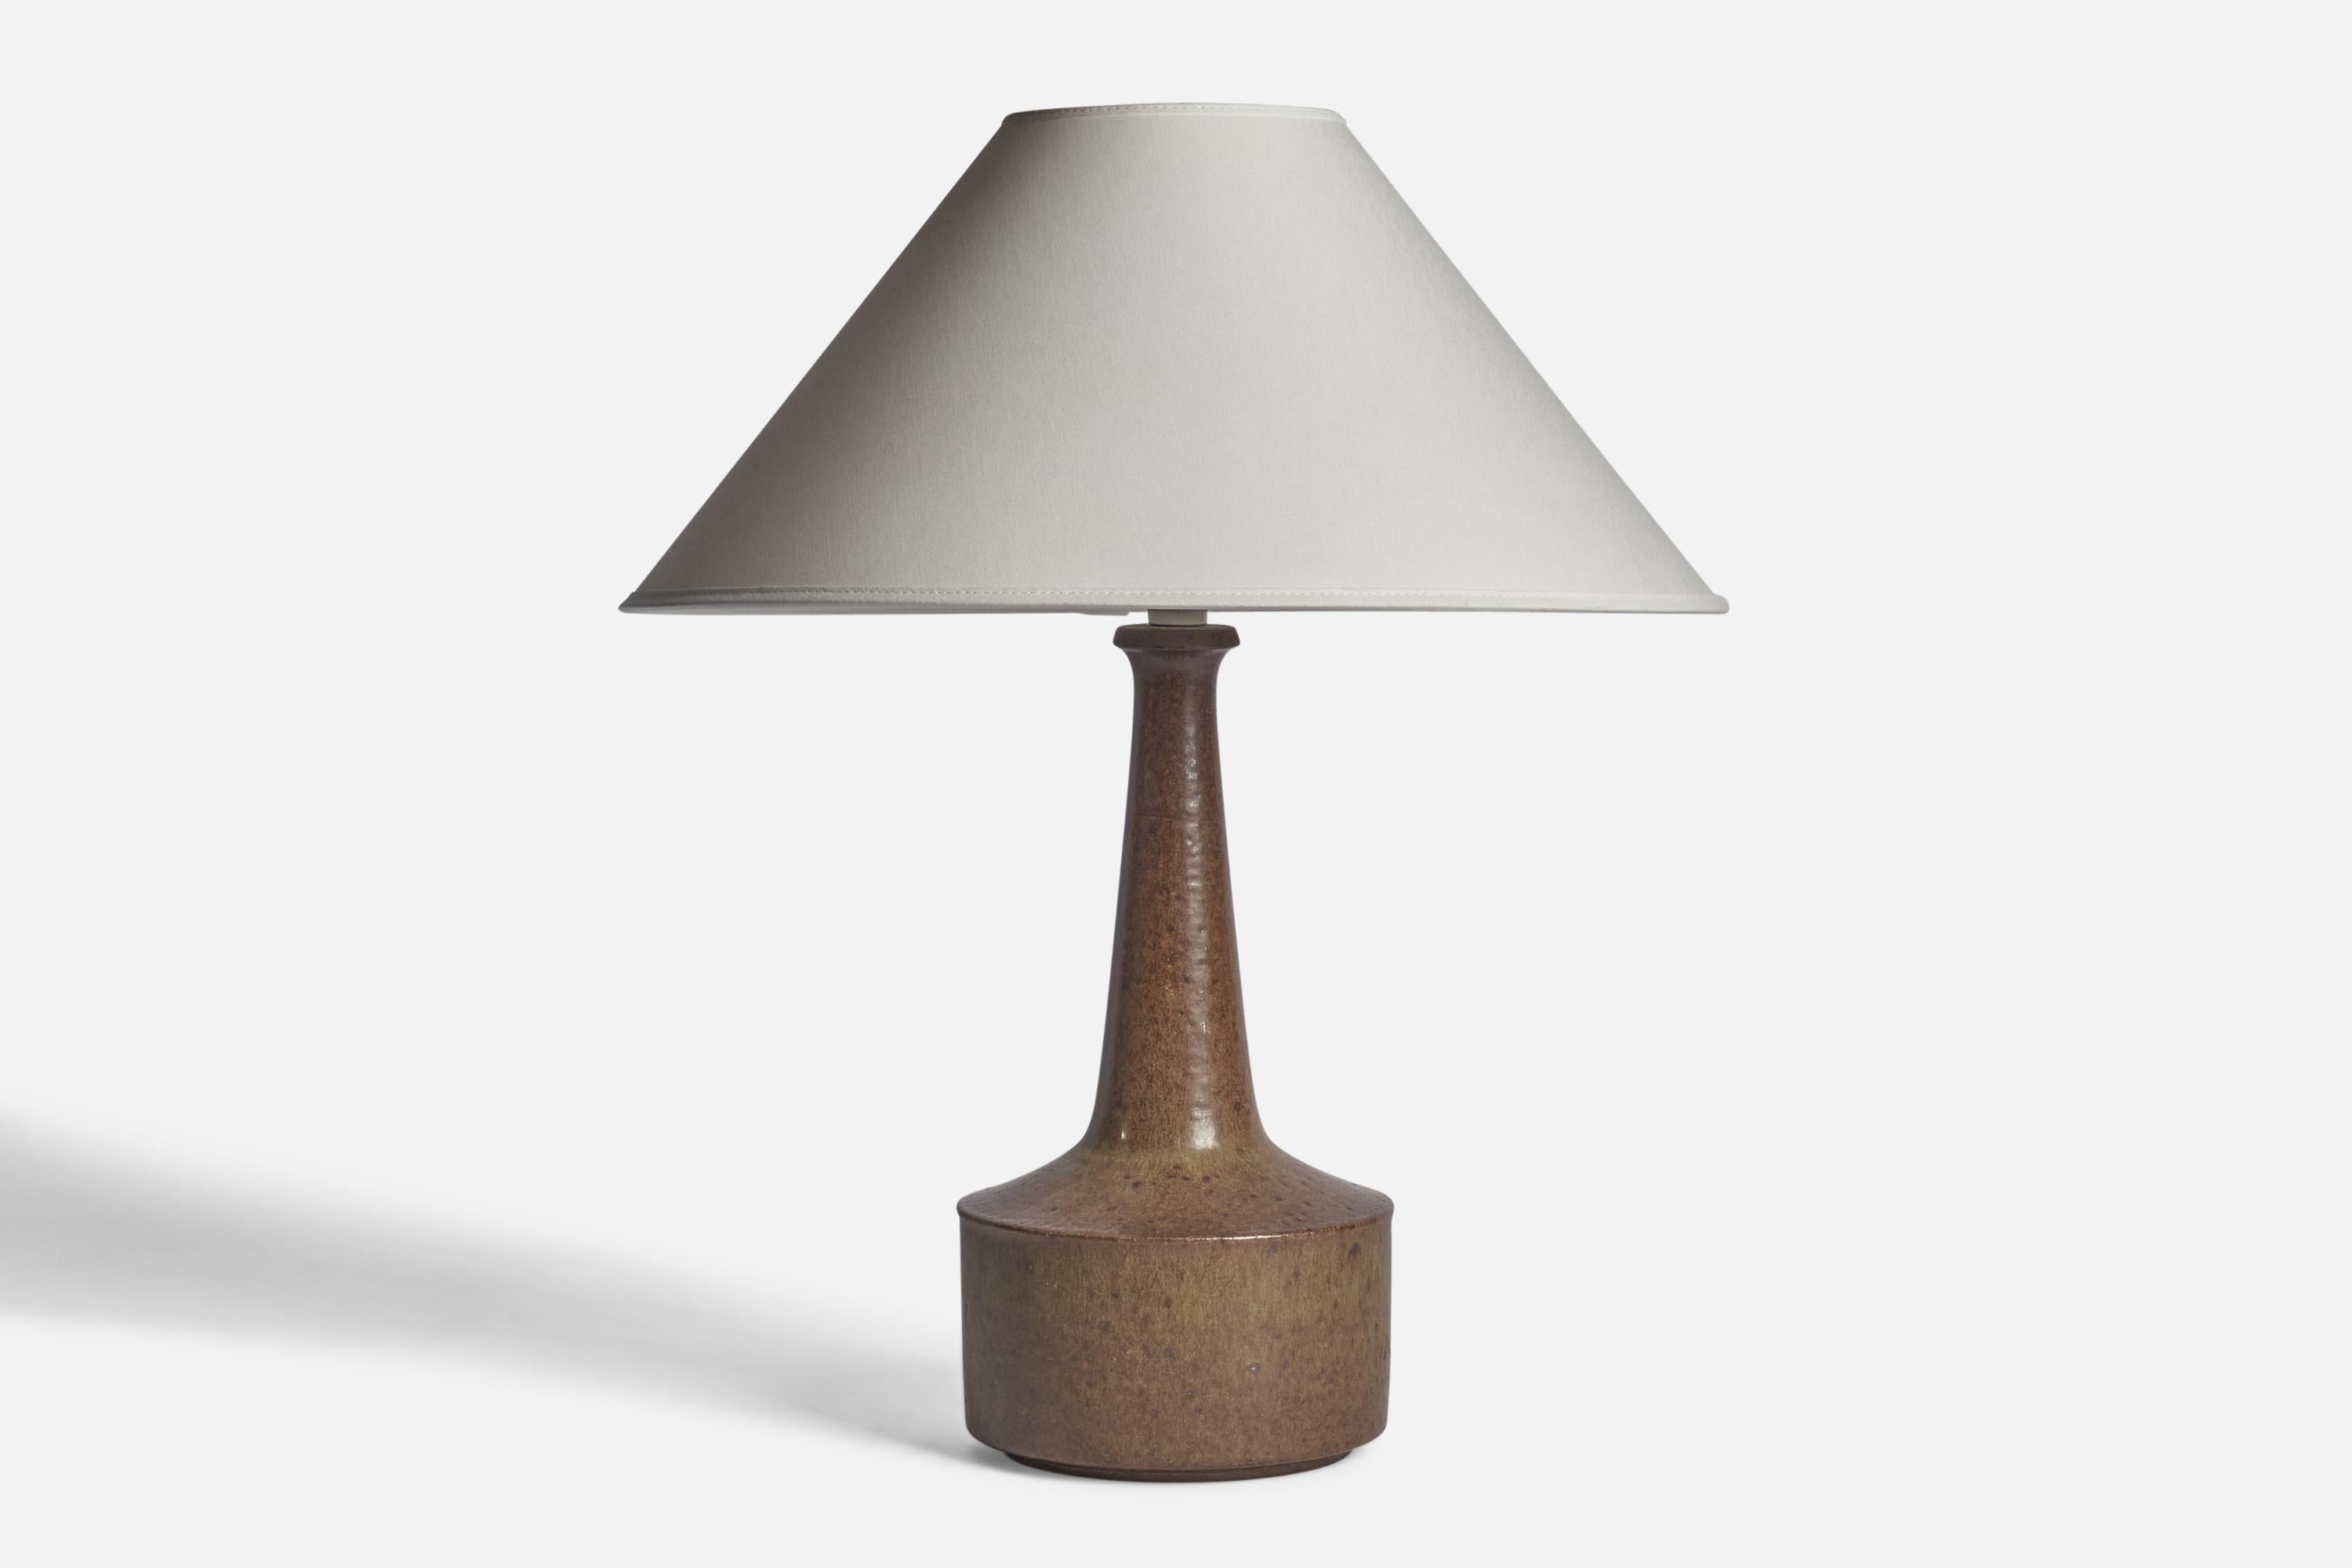 A brown-glazed stoneware table lamp designed by Per & Annelise Linneman-Schmidt and produced by Palshus, Denmark, 1960s

Dimensions of Lamp (inches): 14.5” H x 6.25” Diameter
Dimensions of Shade (inches): 4.5” Top Diameter x 16” Bottom Diameter x